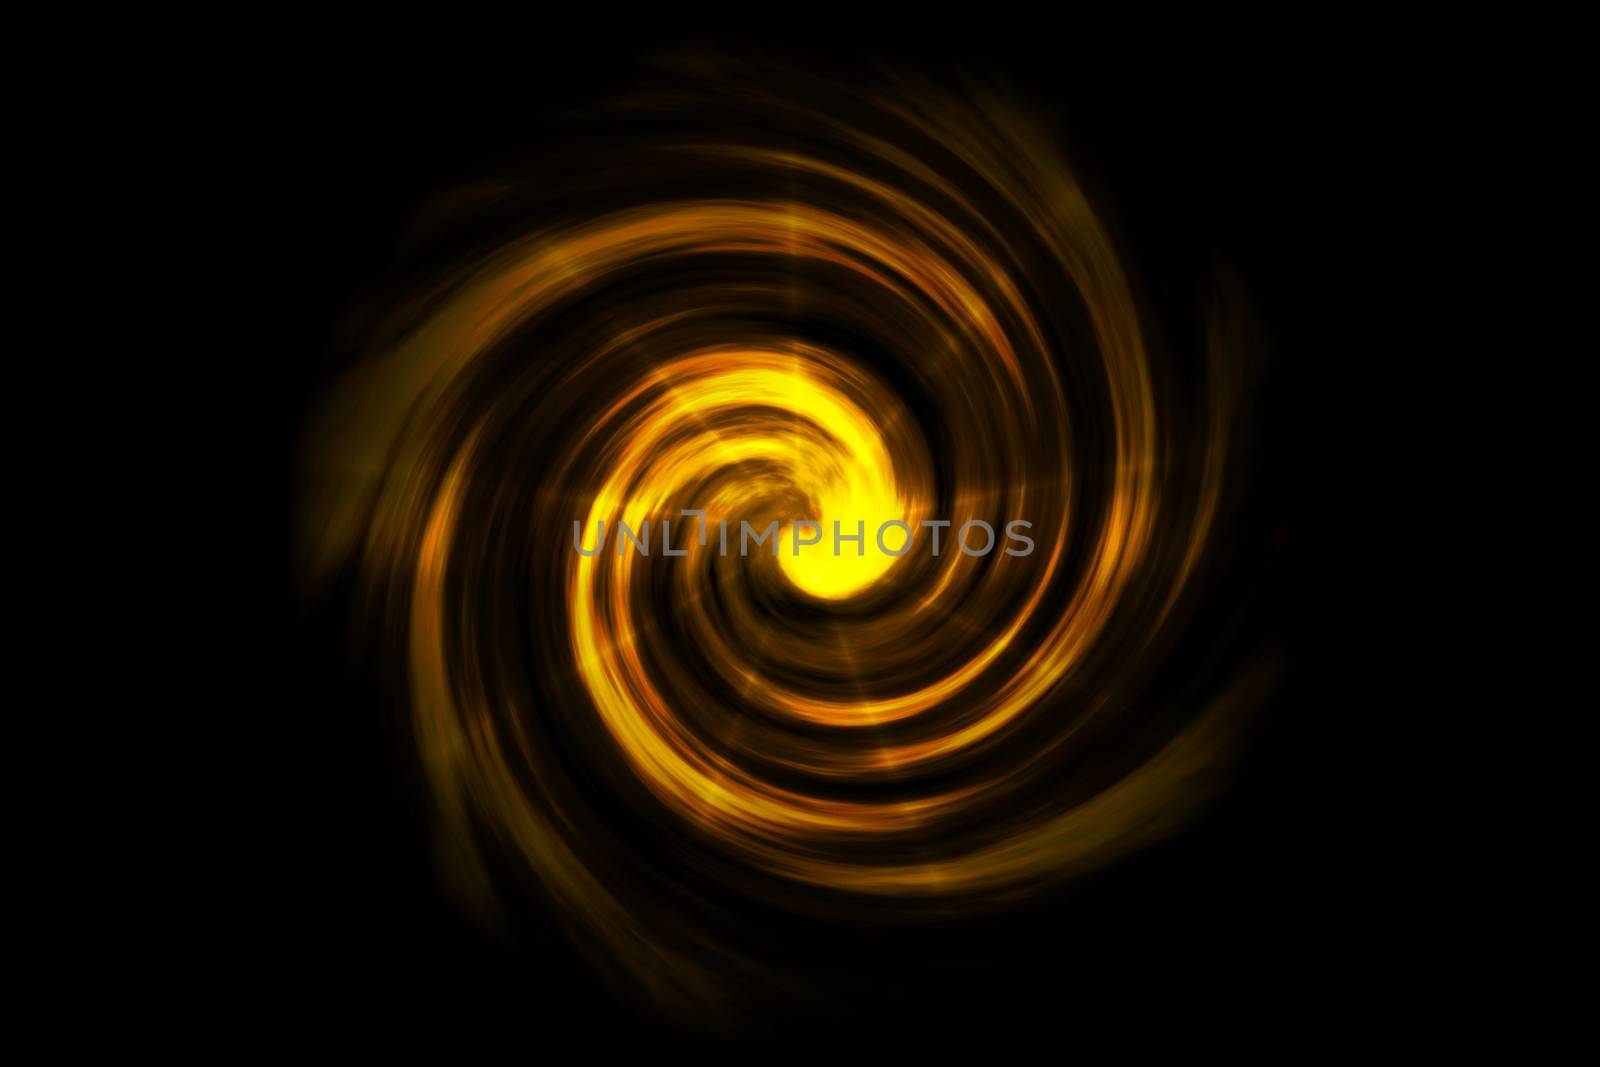 Glowing spiral tunnel with golden fog on black backdrop